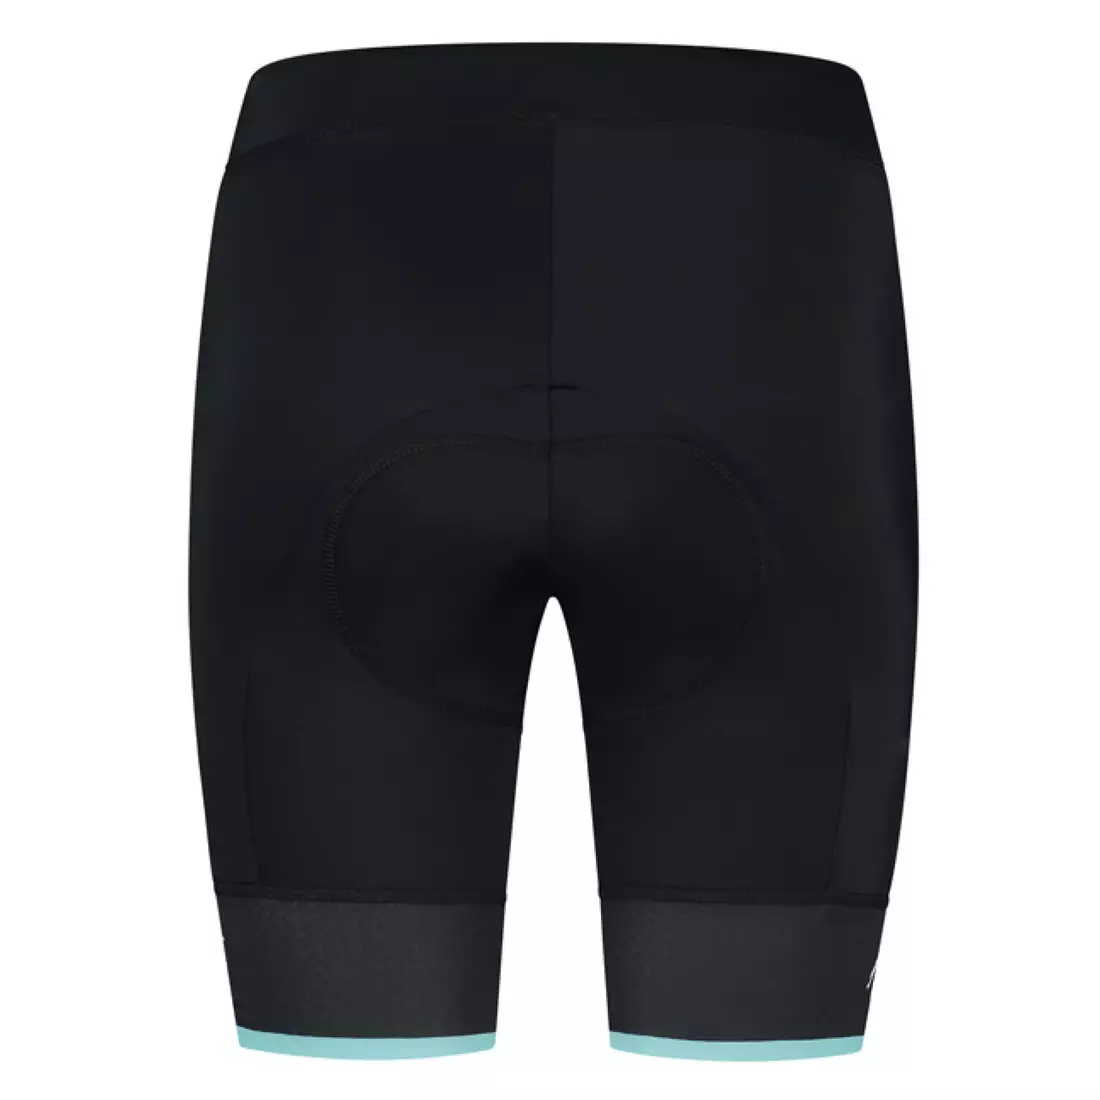 ROGELLI SELECT II Women's cycling shorts, black and turquoise